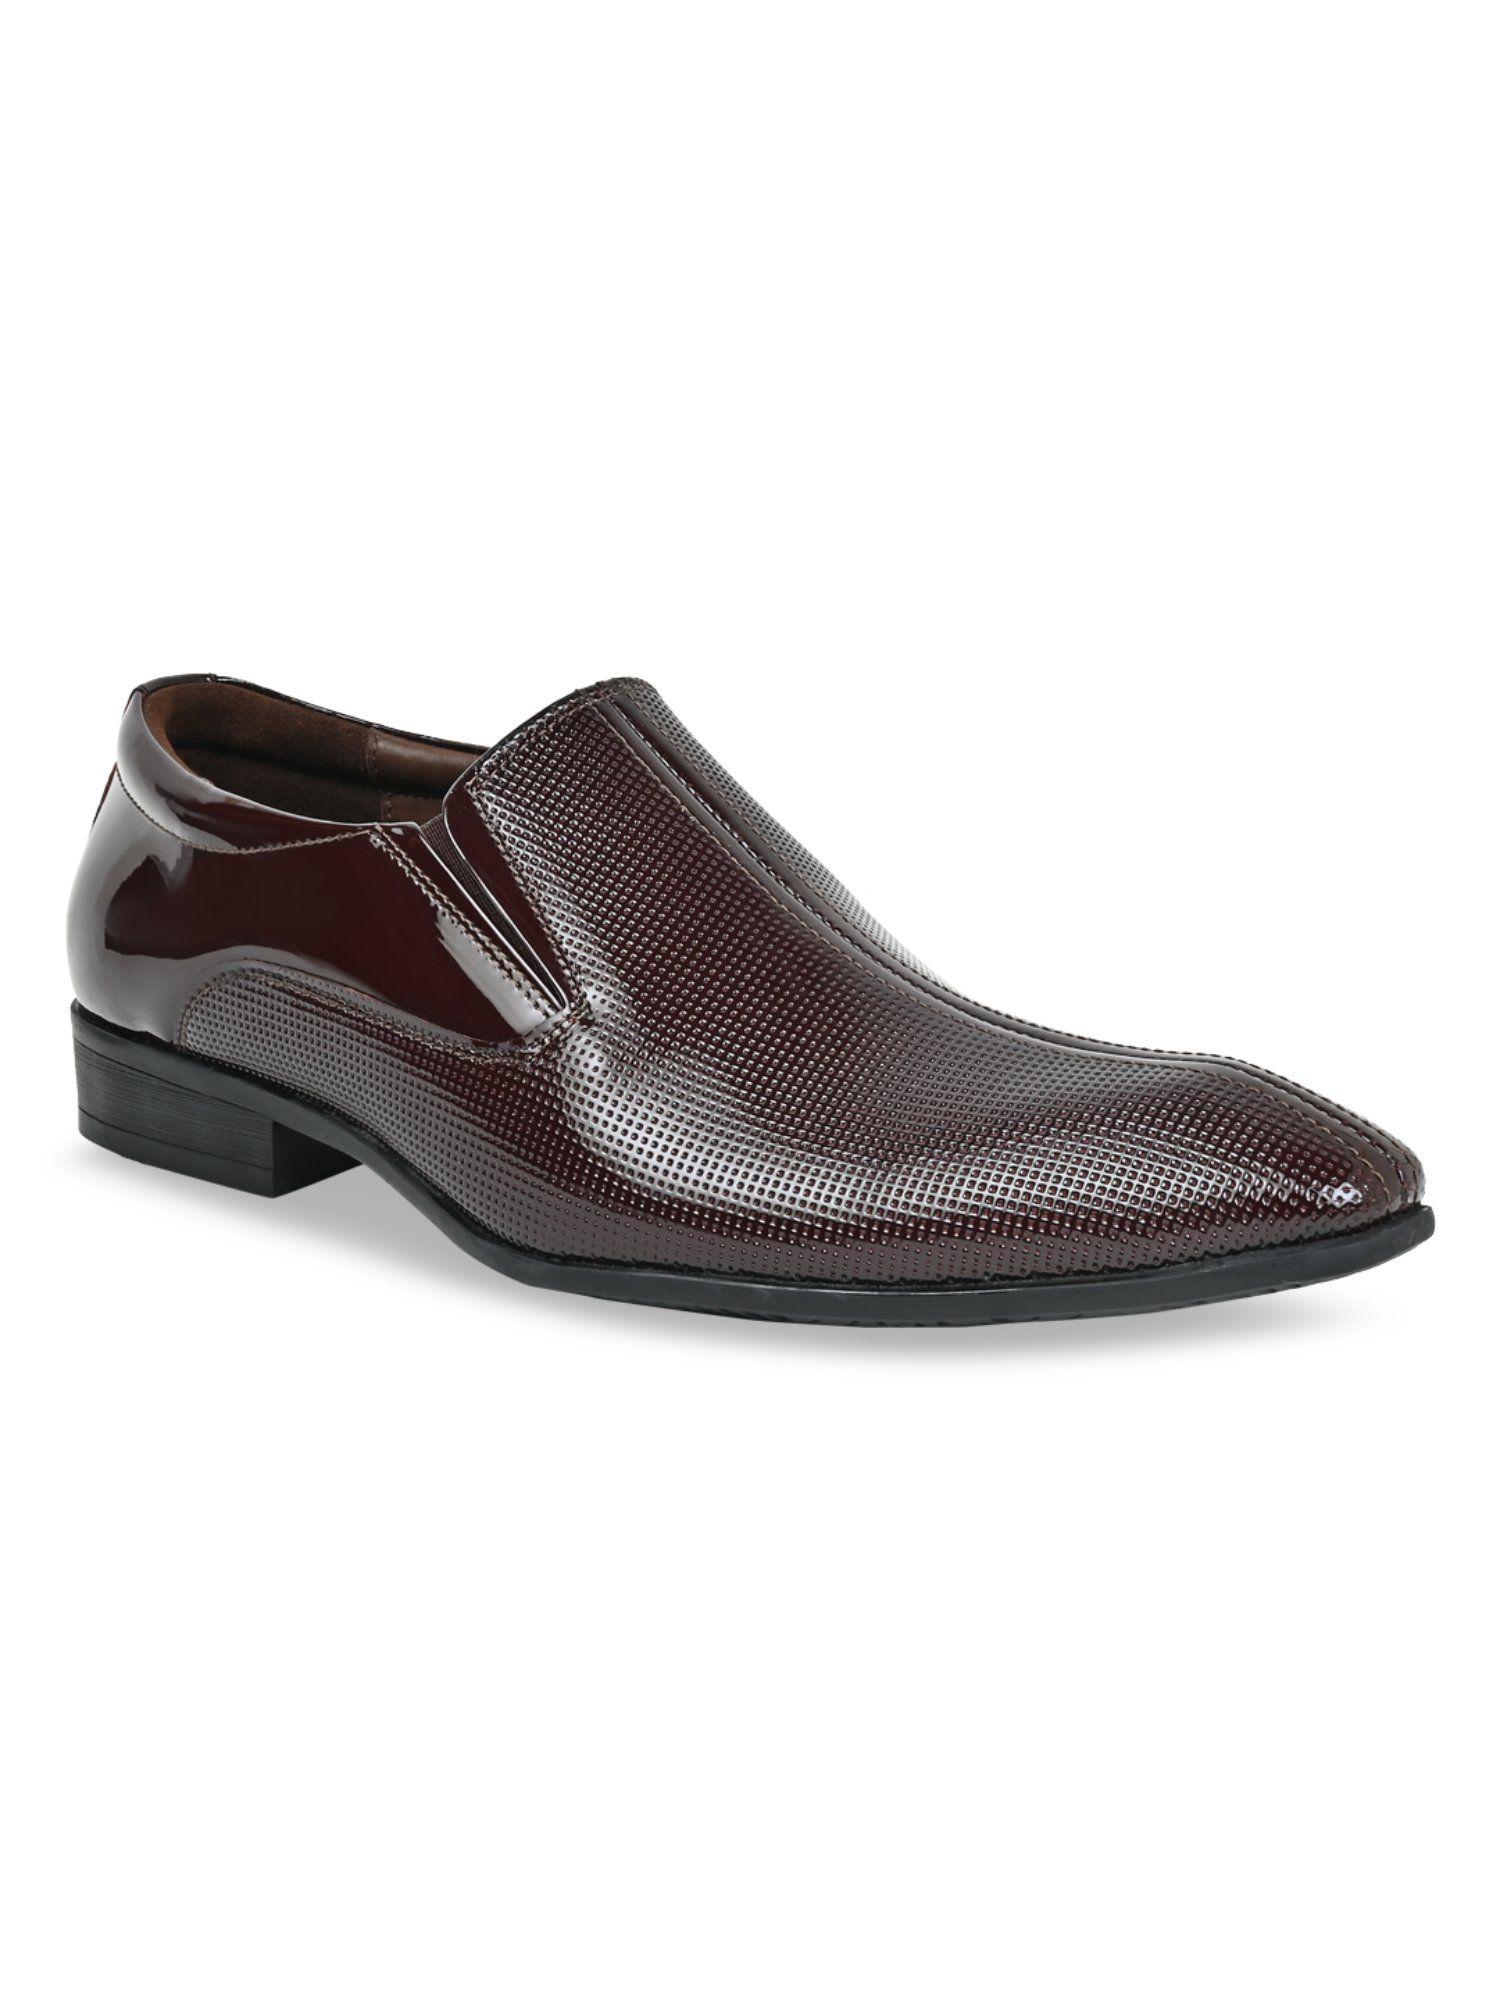 burgundy men textured leather formal patent shoes